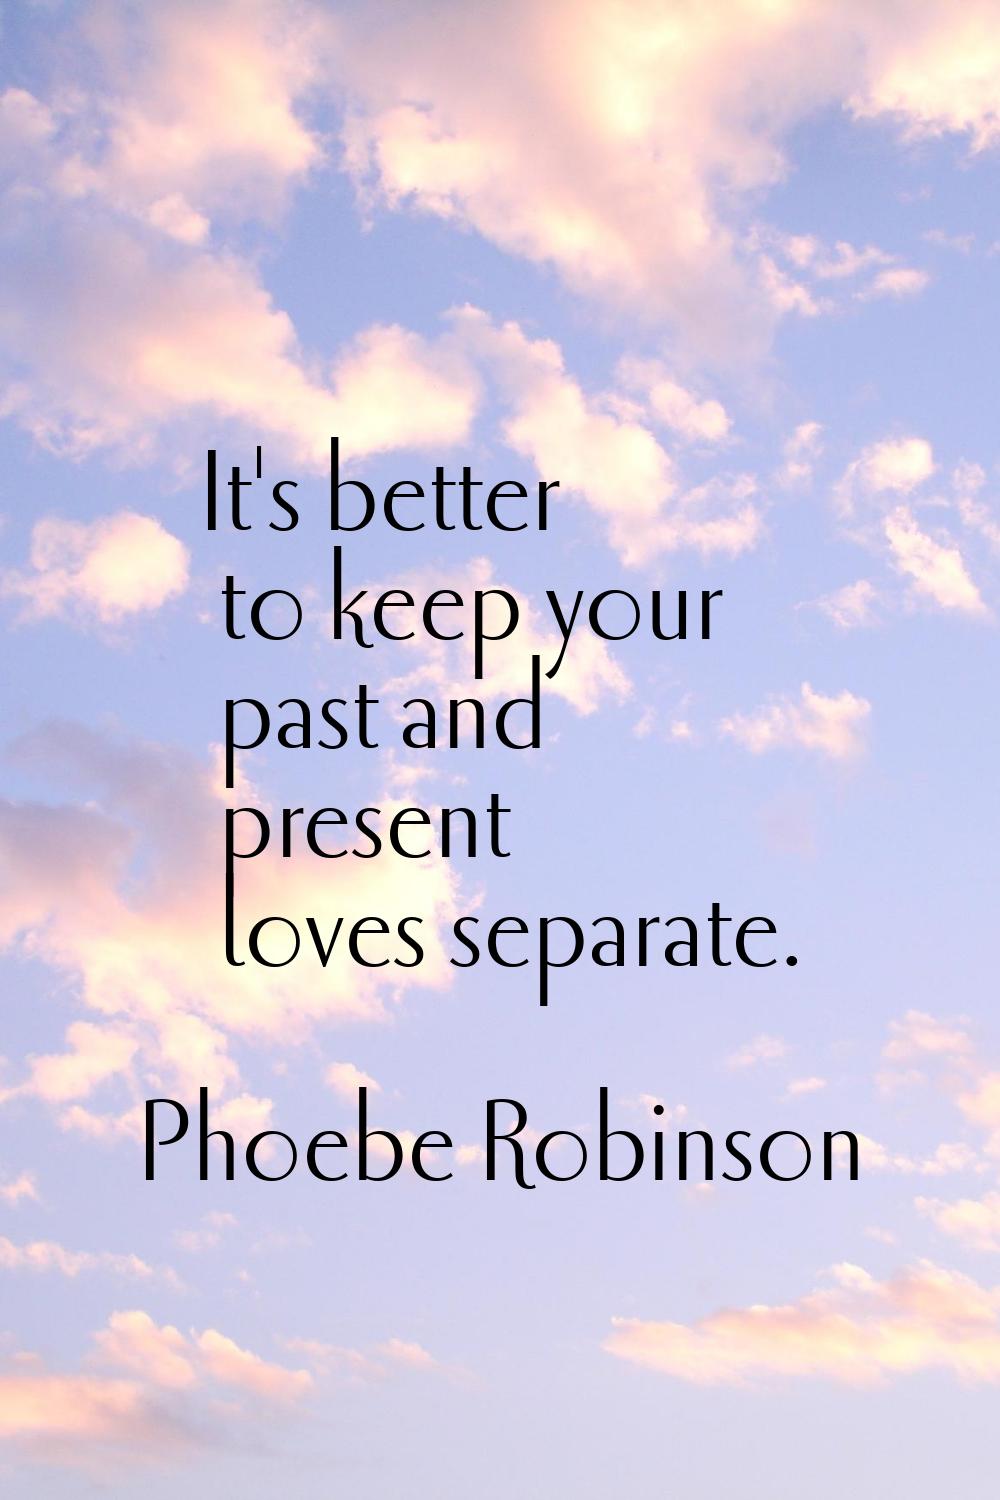 It's better to keep your past and present loves separate.